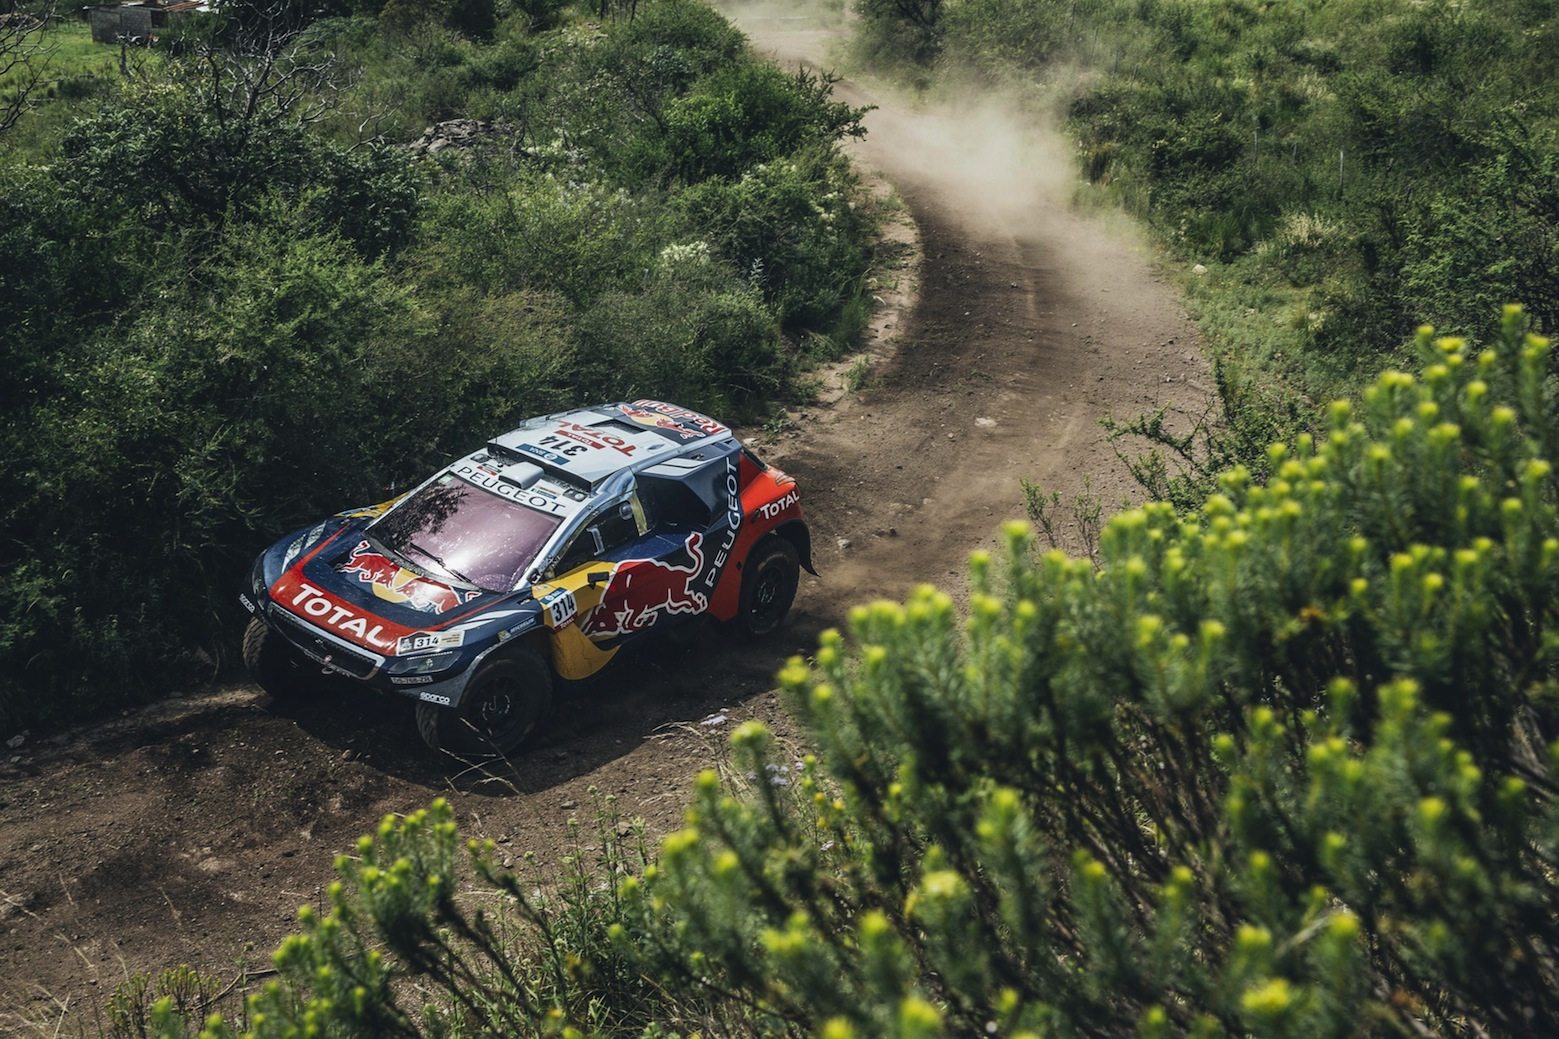 Sebastien Loeb (FRA) from Team Peugeot Total performs during stage 2 of Rally Dakar 2016 from Villa Carlos Paz to Termas de Rio Hondo, Argentina on January 4, 2016. // Flavien Duhamel/Red Bull Content Pool // P-20160104-00165 // Usage for editorial use only // Please go to www.redbullcontentpool.com for further information. //